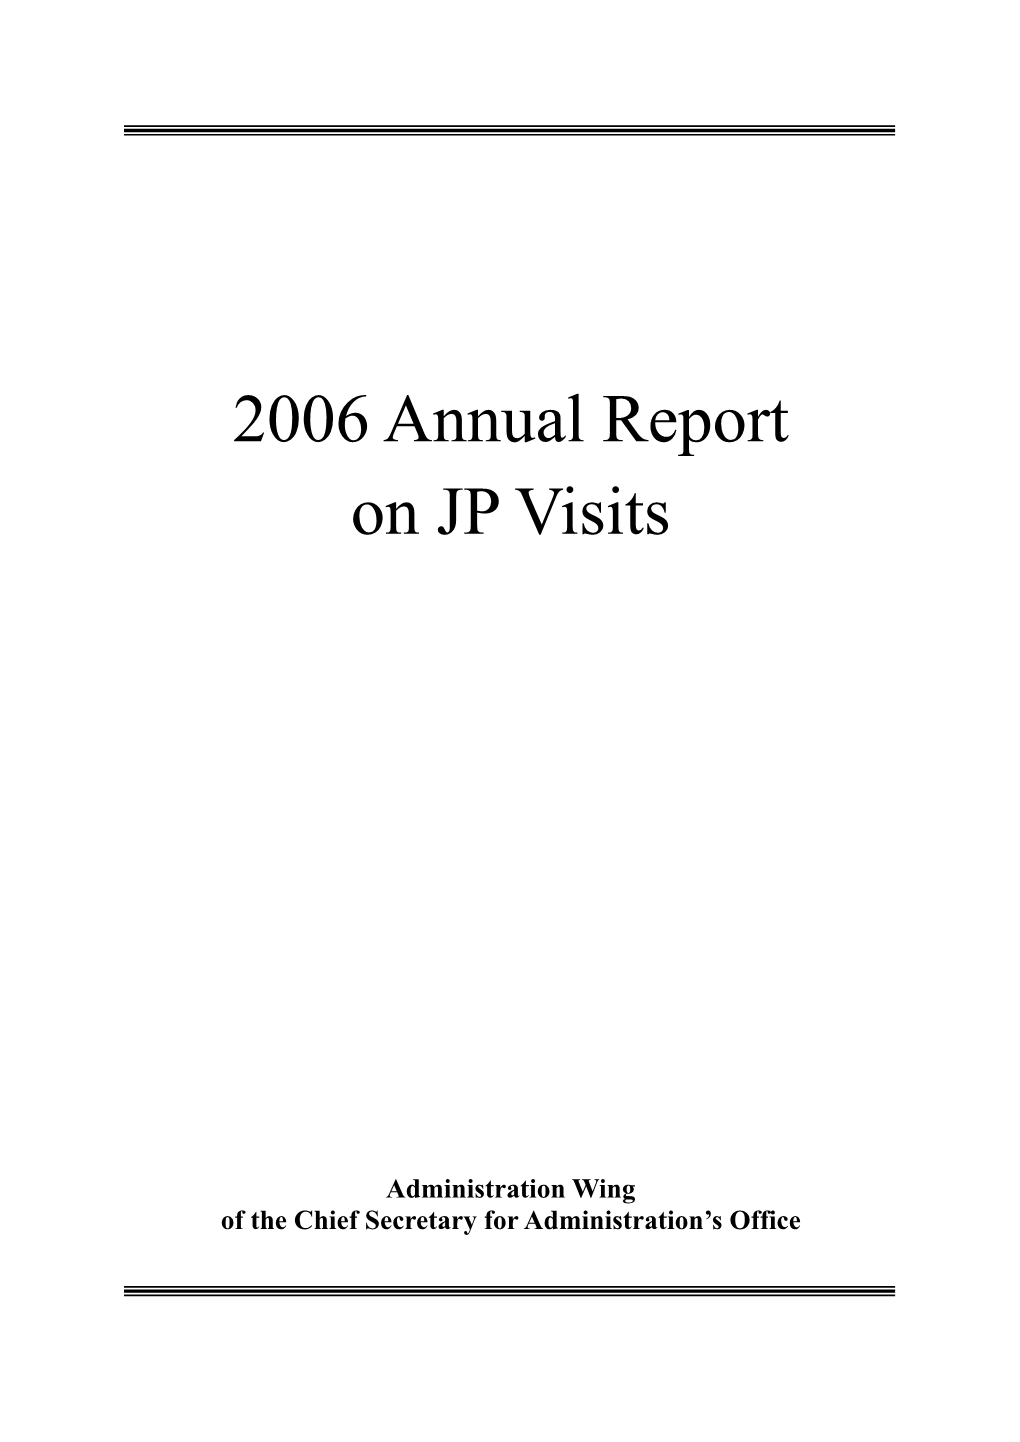 2006 Annual Report on JP Visits